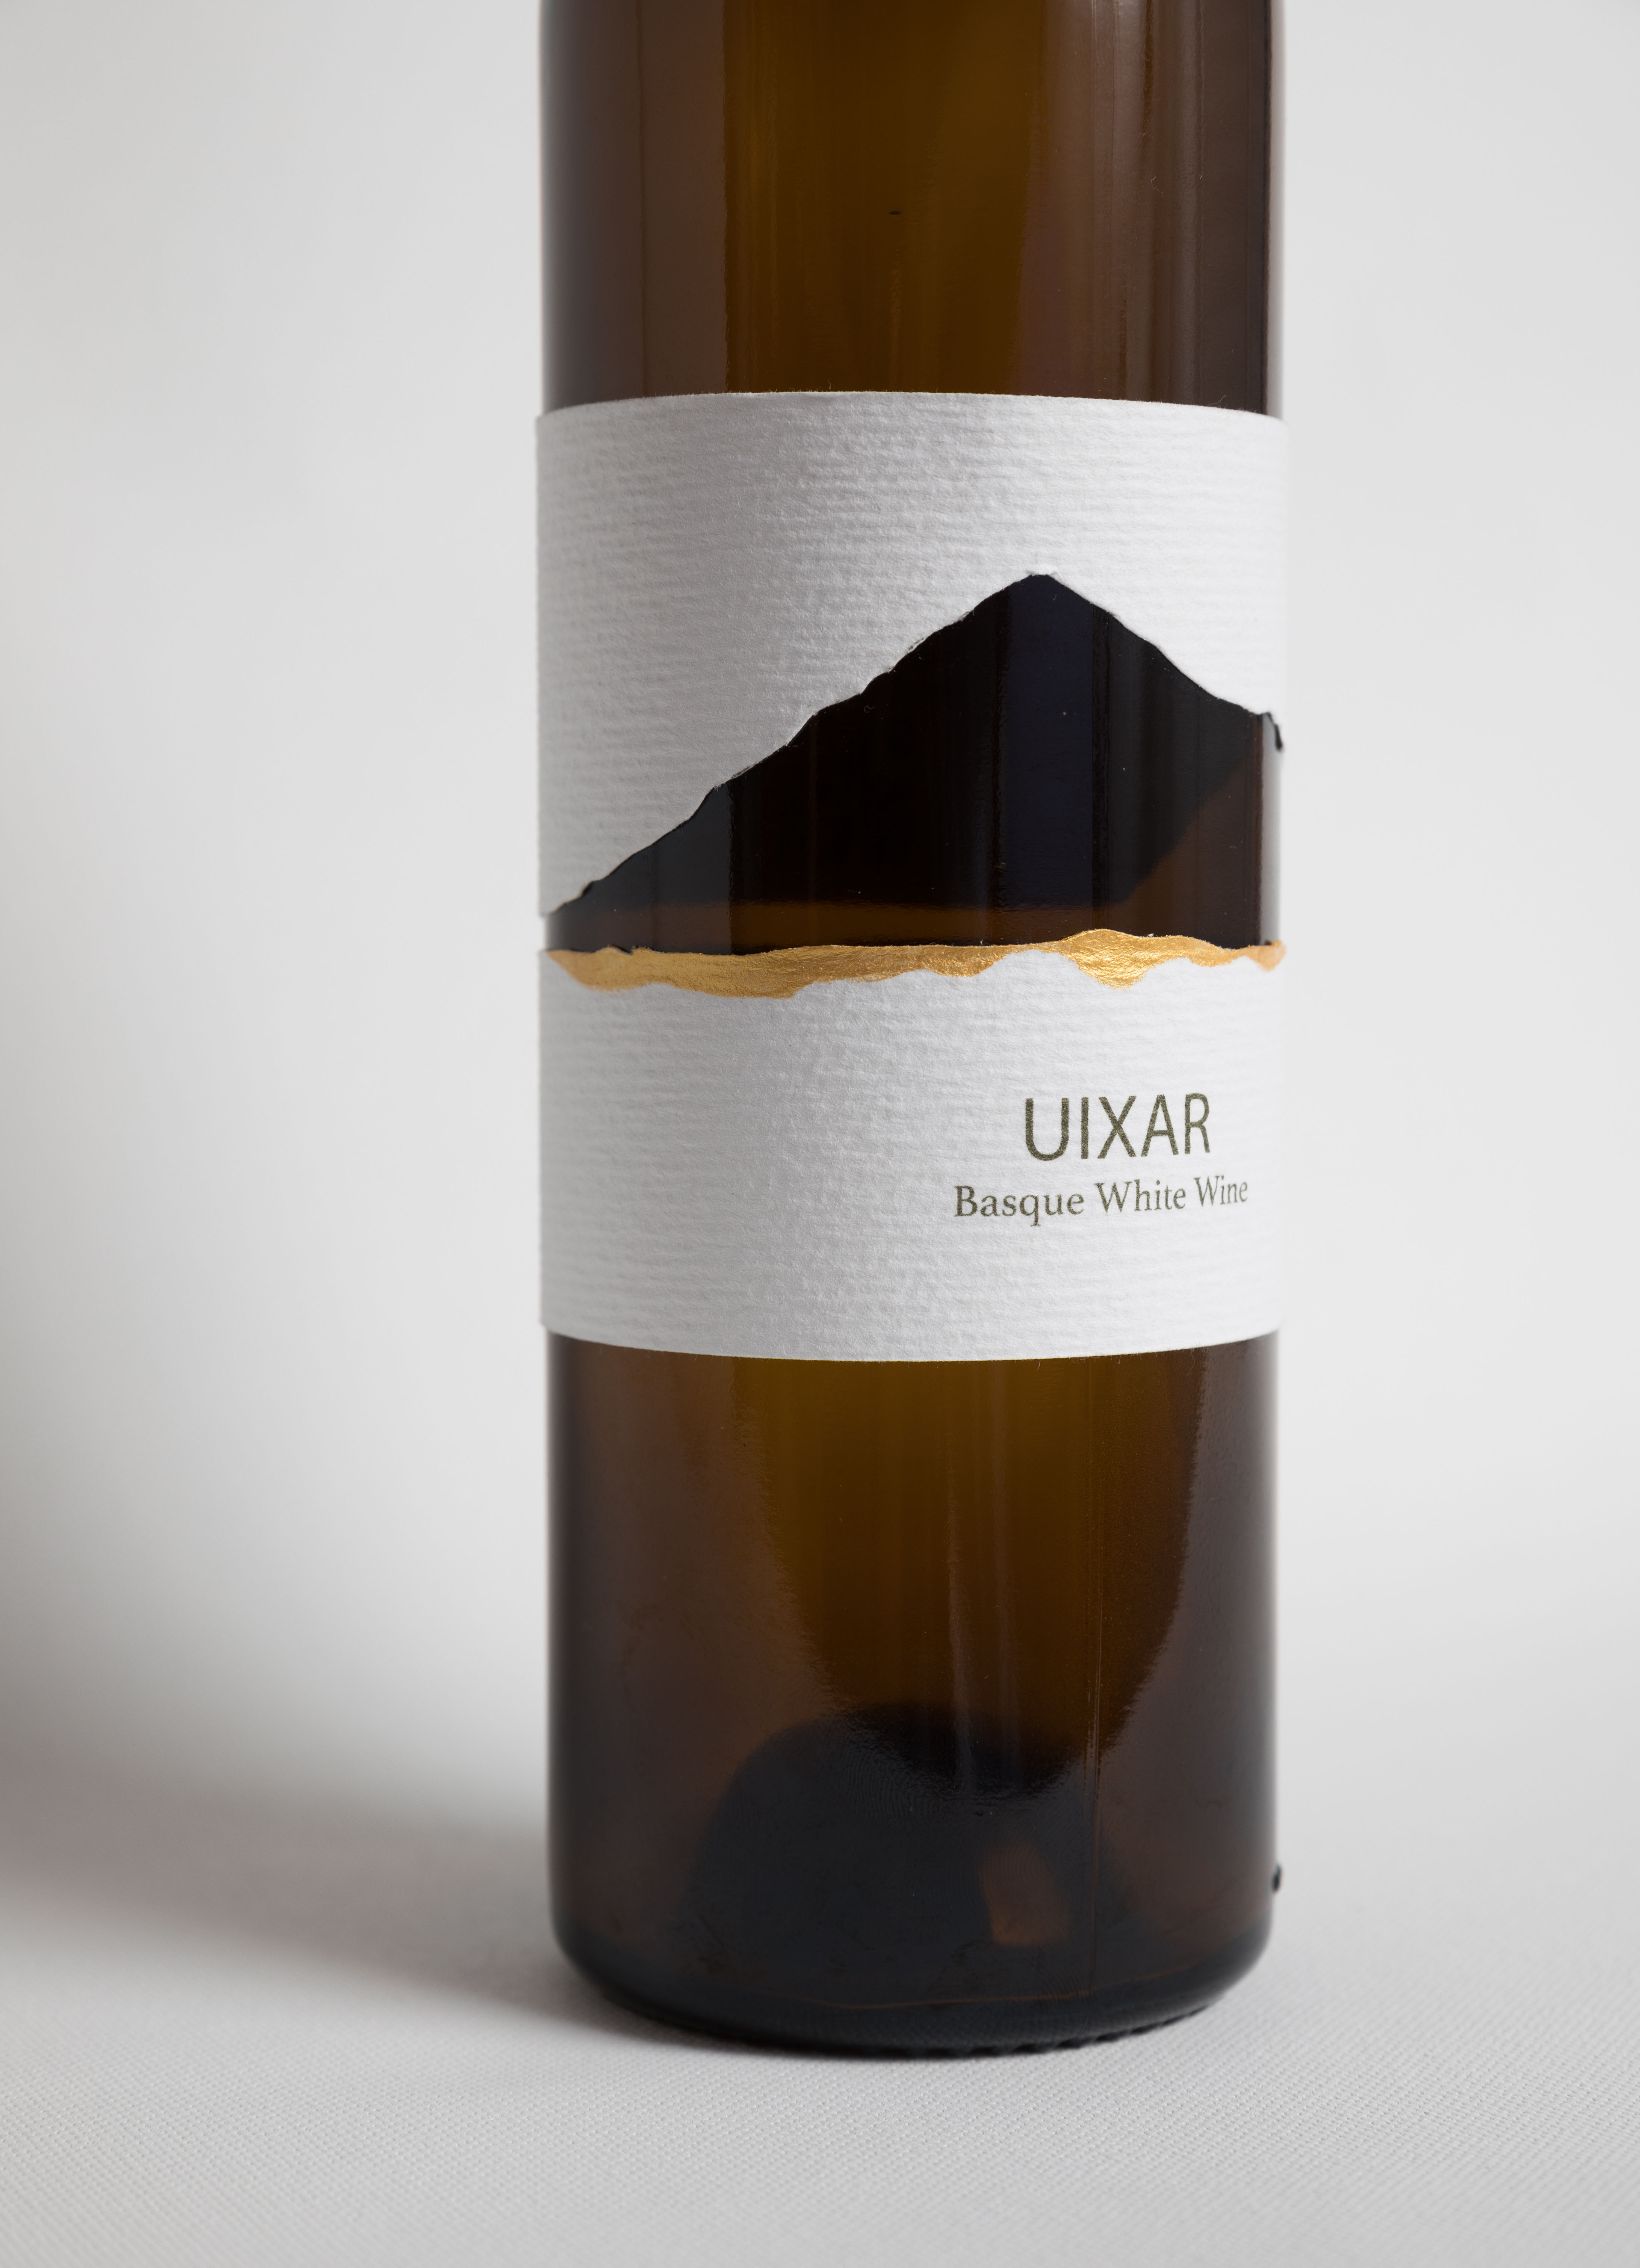 Label and packaging design for Txakoli Uixar by Laura Freijo - Creative Work